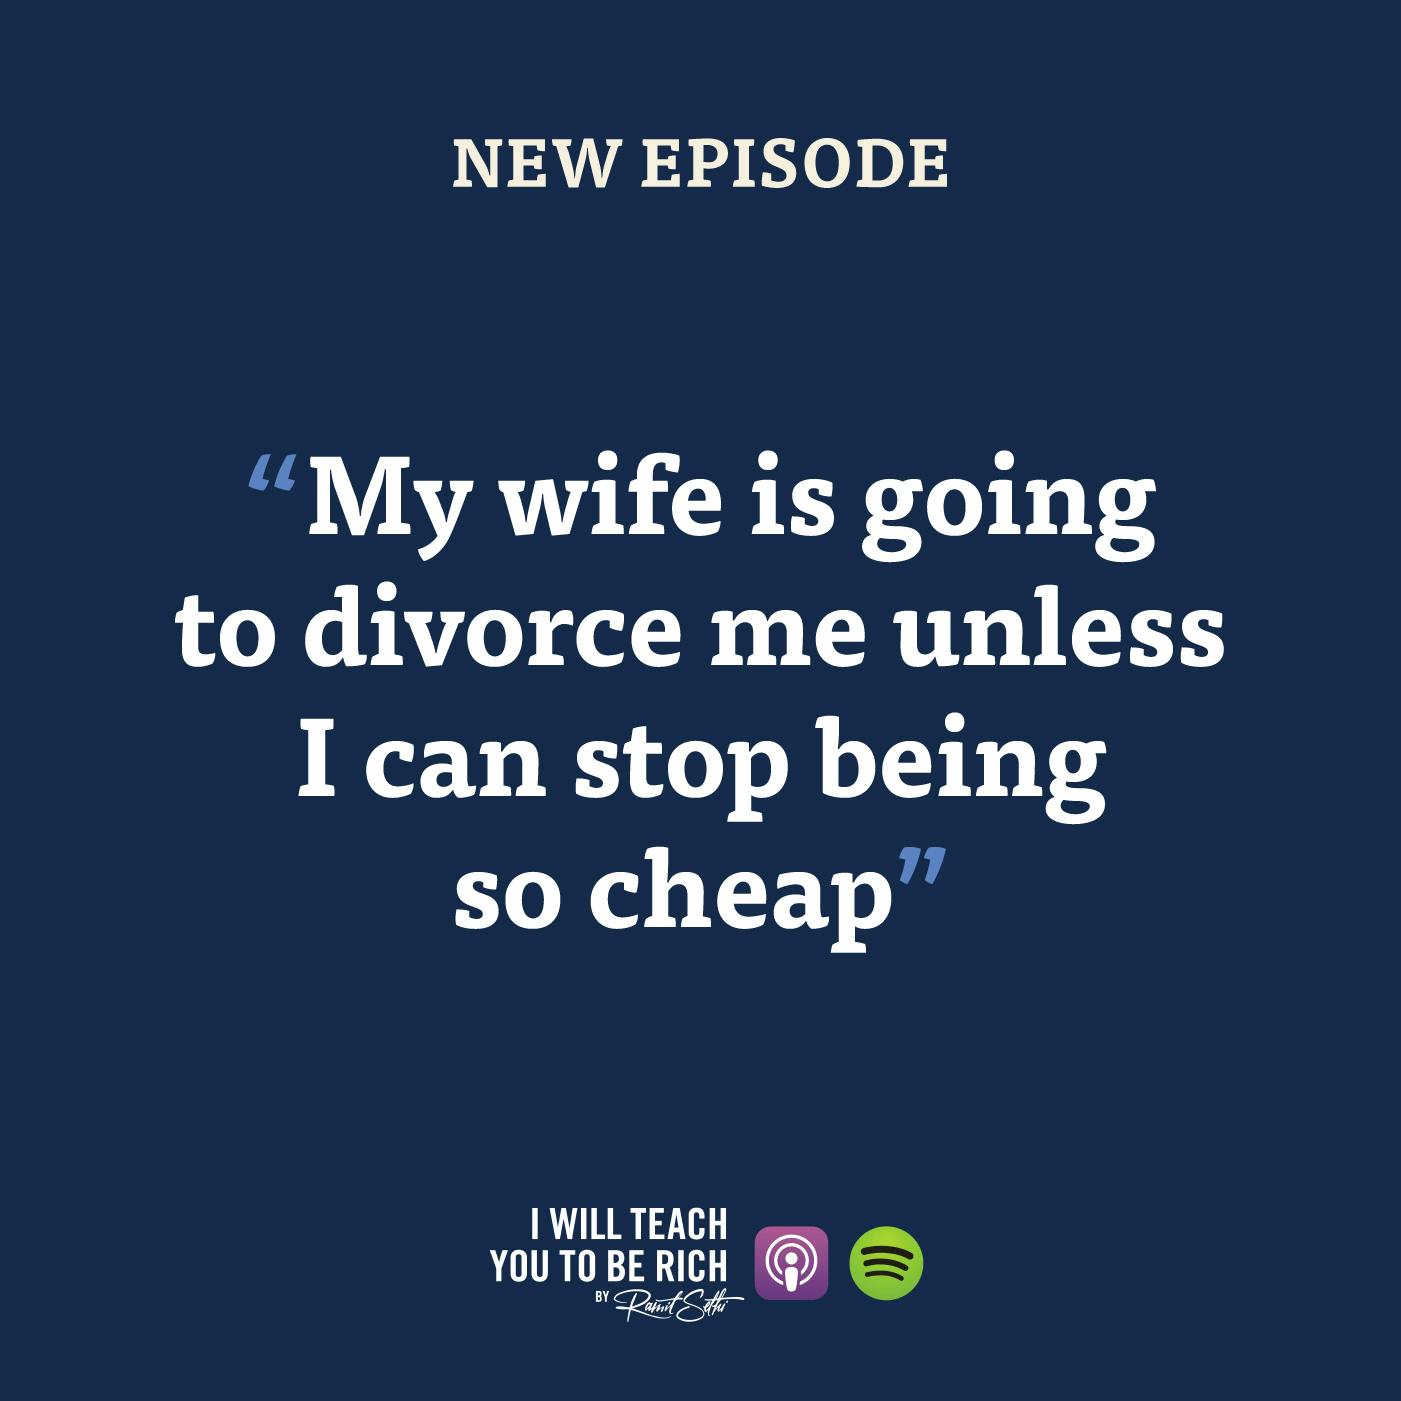 20. “My wife is going to divorce me unless I can stop being so cheap”